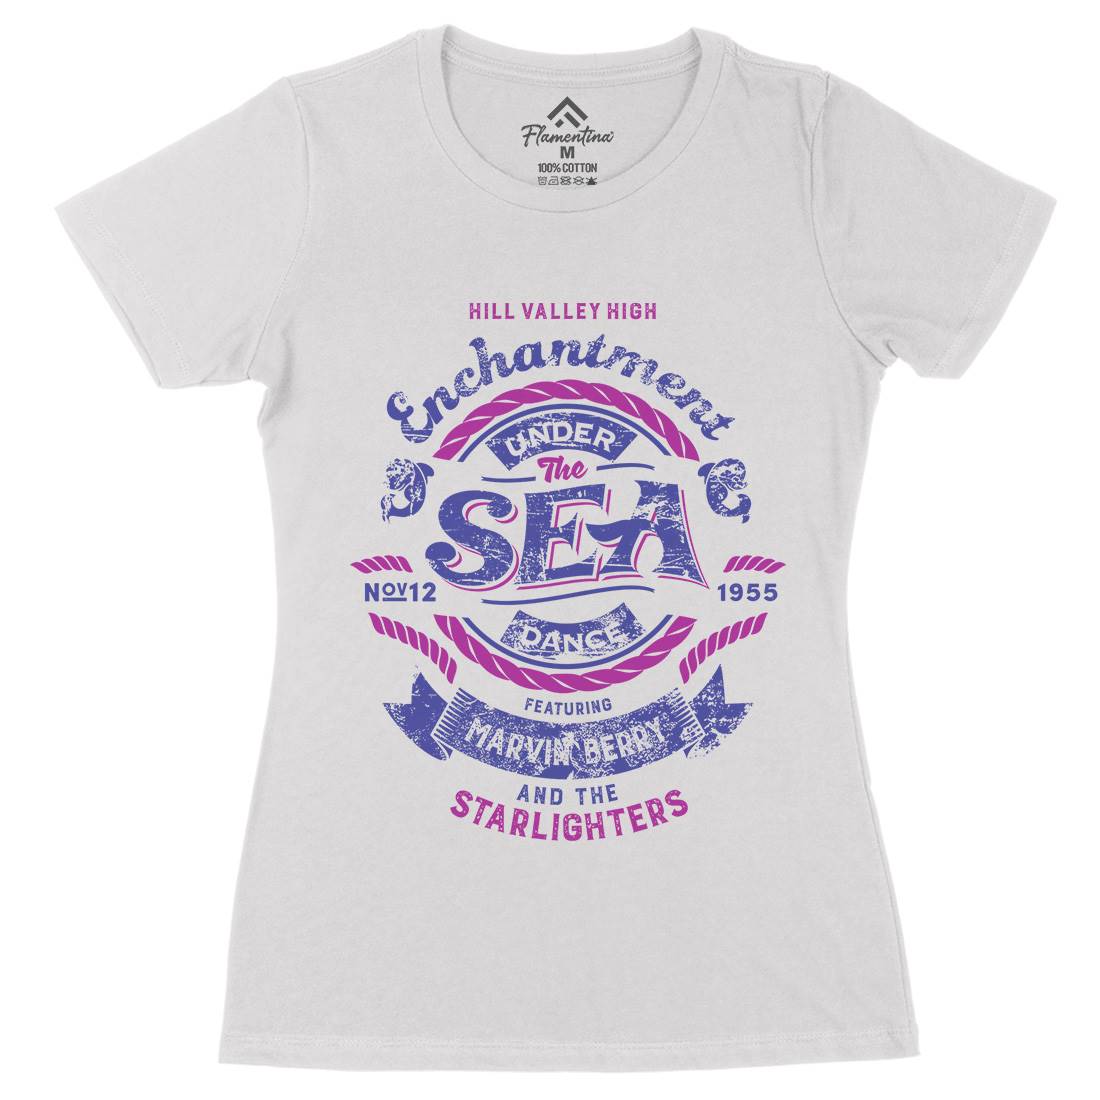 Enchantment Under The Sea Womens Organic Crew Neck T-Shirt Space D329